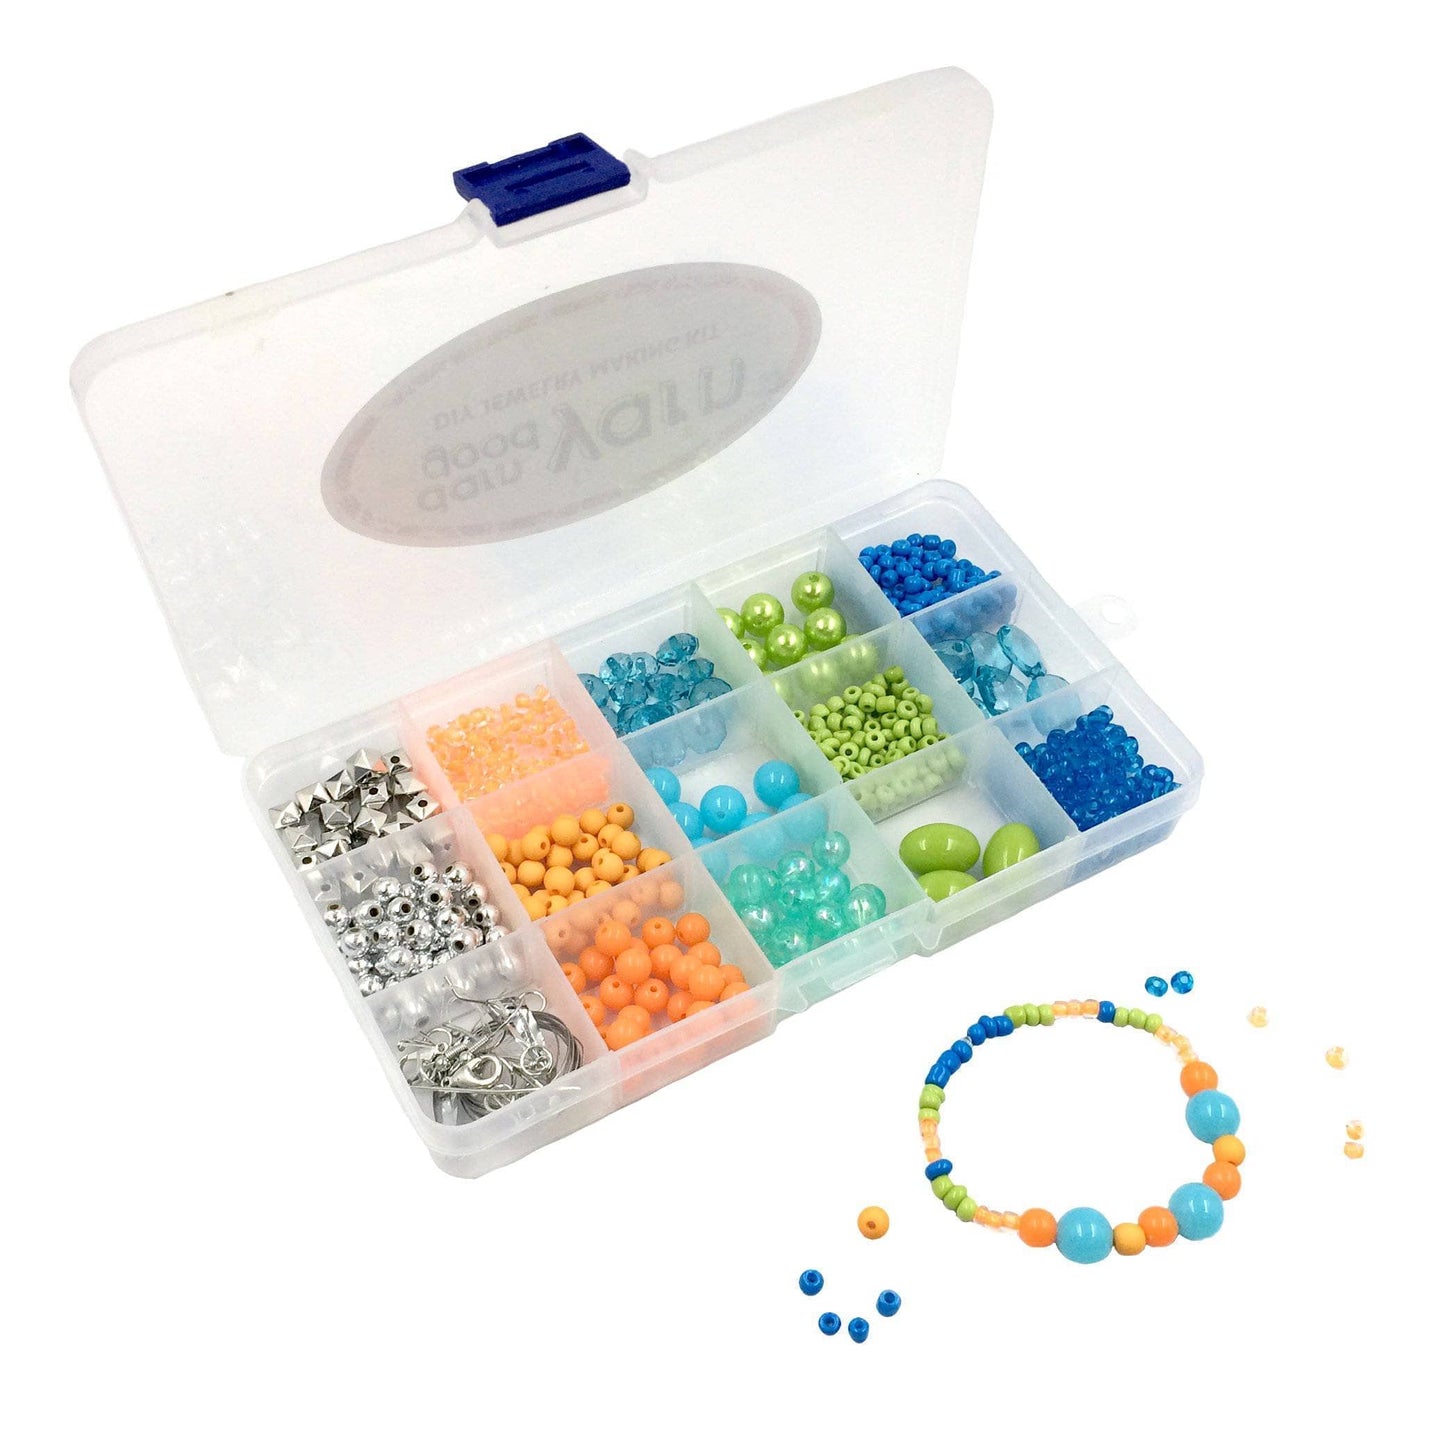 Jewelry Making Kit box in a white background